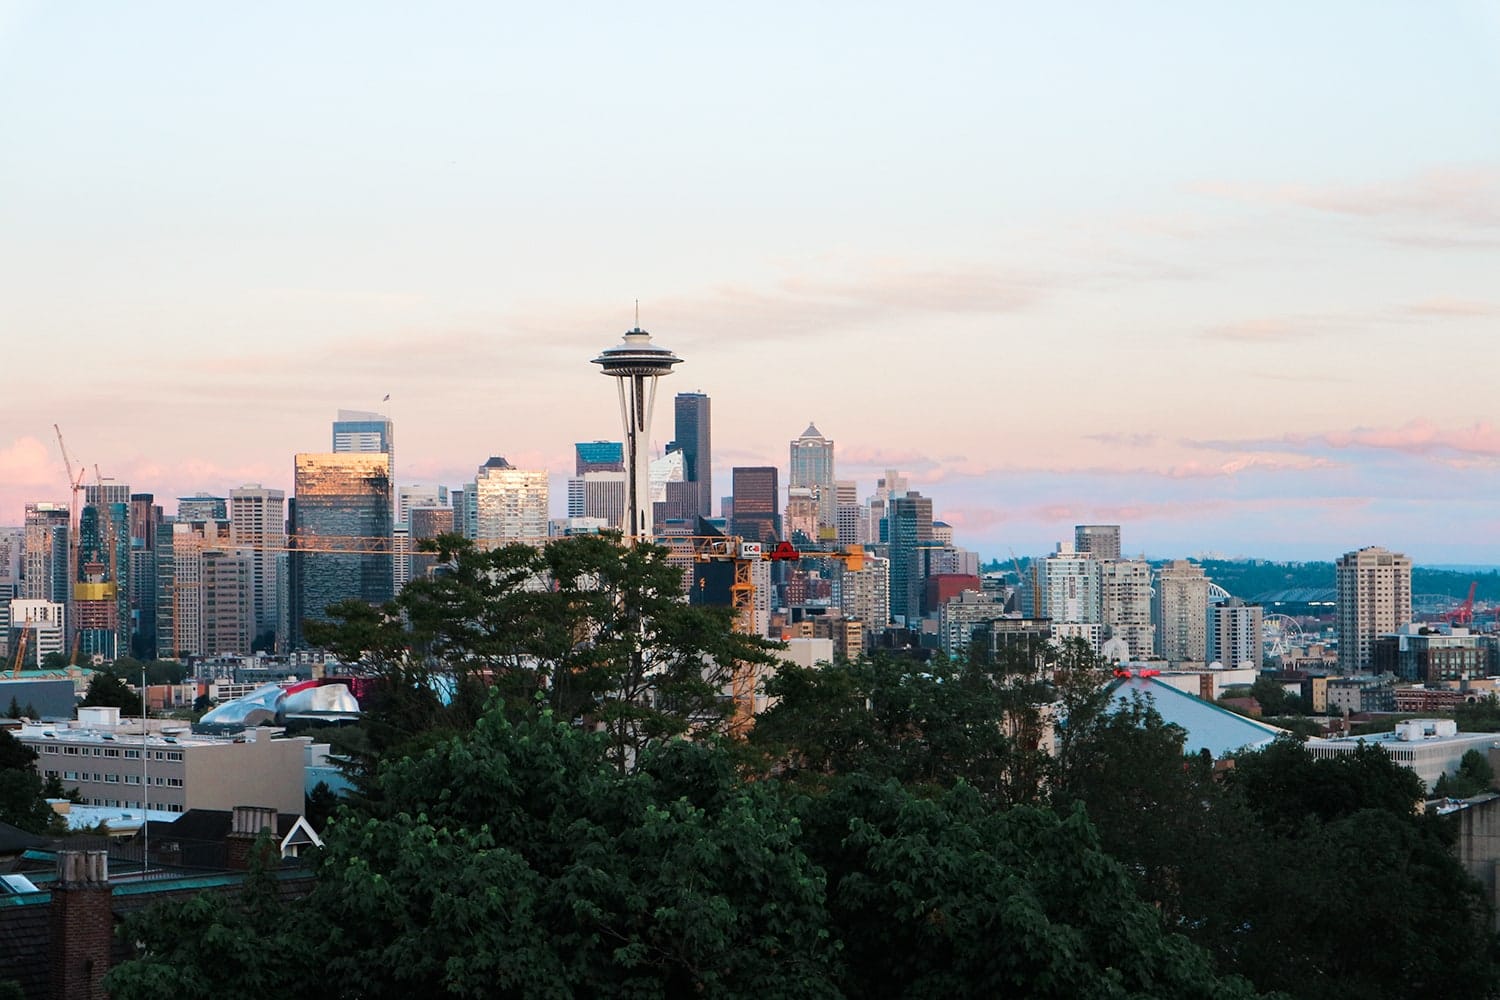 Seattle Travel Guide: Seattle with Kids by popular lifestyle blogger Meg O. on the Go